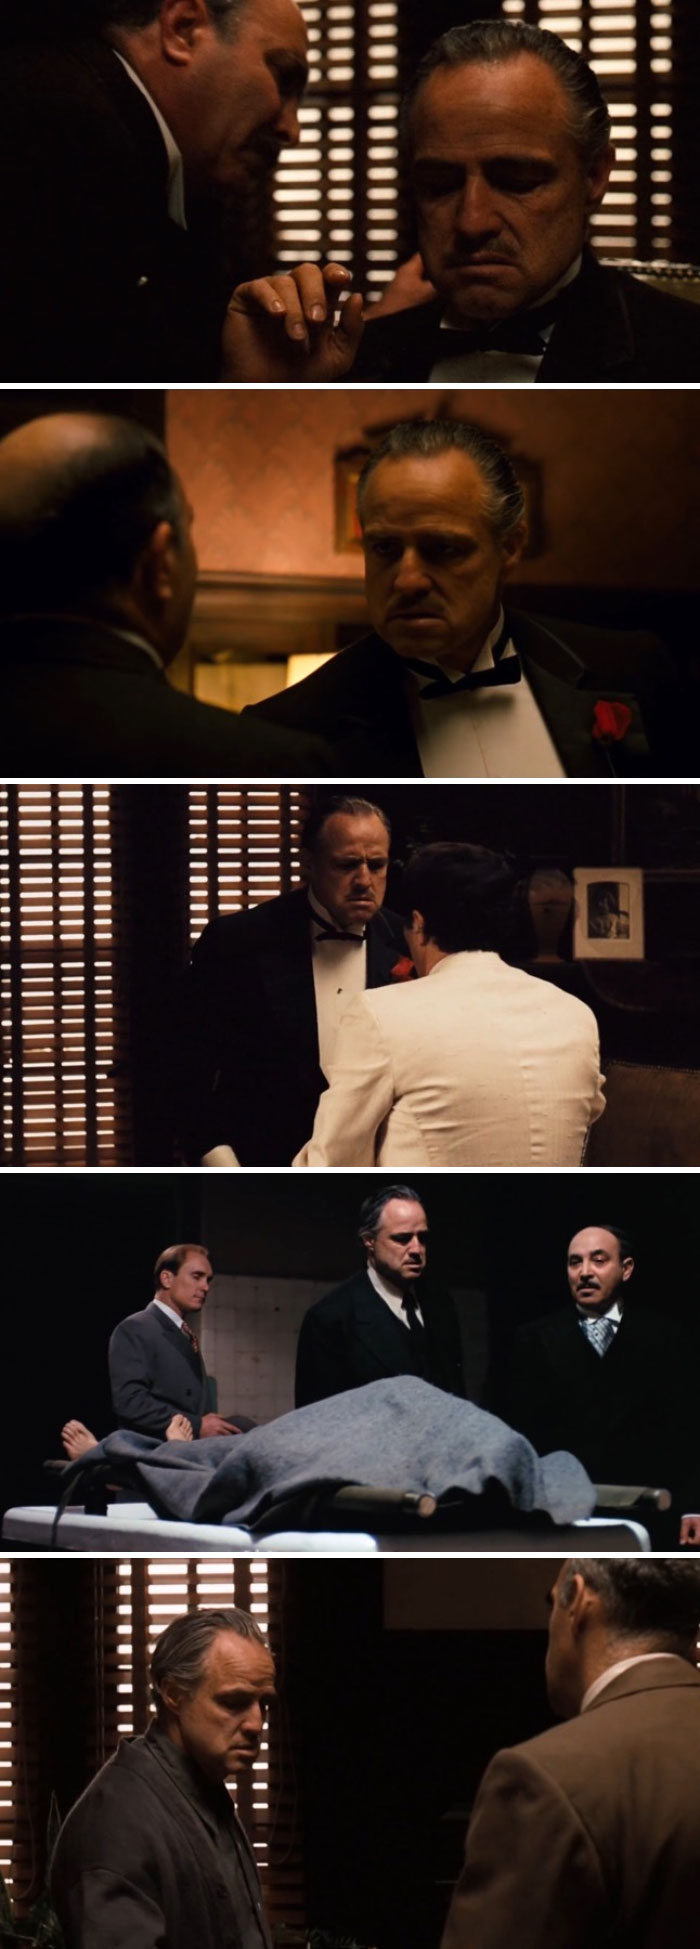 In The Godfather, Cinematographer, Gordon Willis Thought Vito Corleone Would Seem More Sinister If We Couldn't See His Eyes While Conducting Family Business